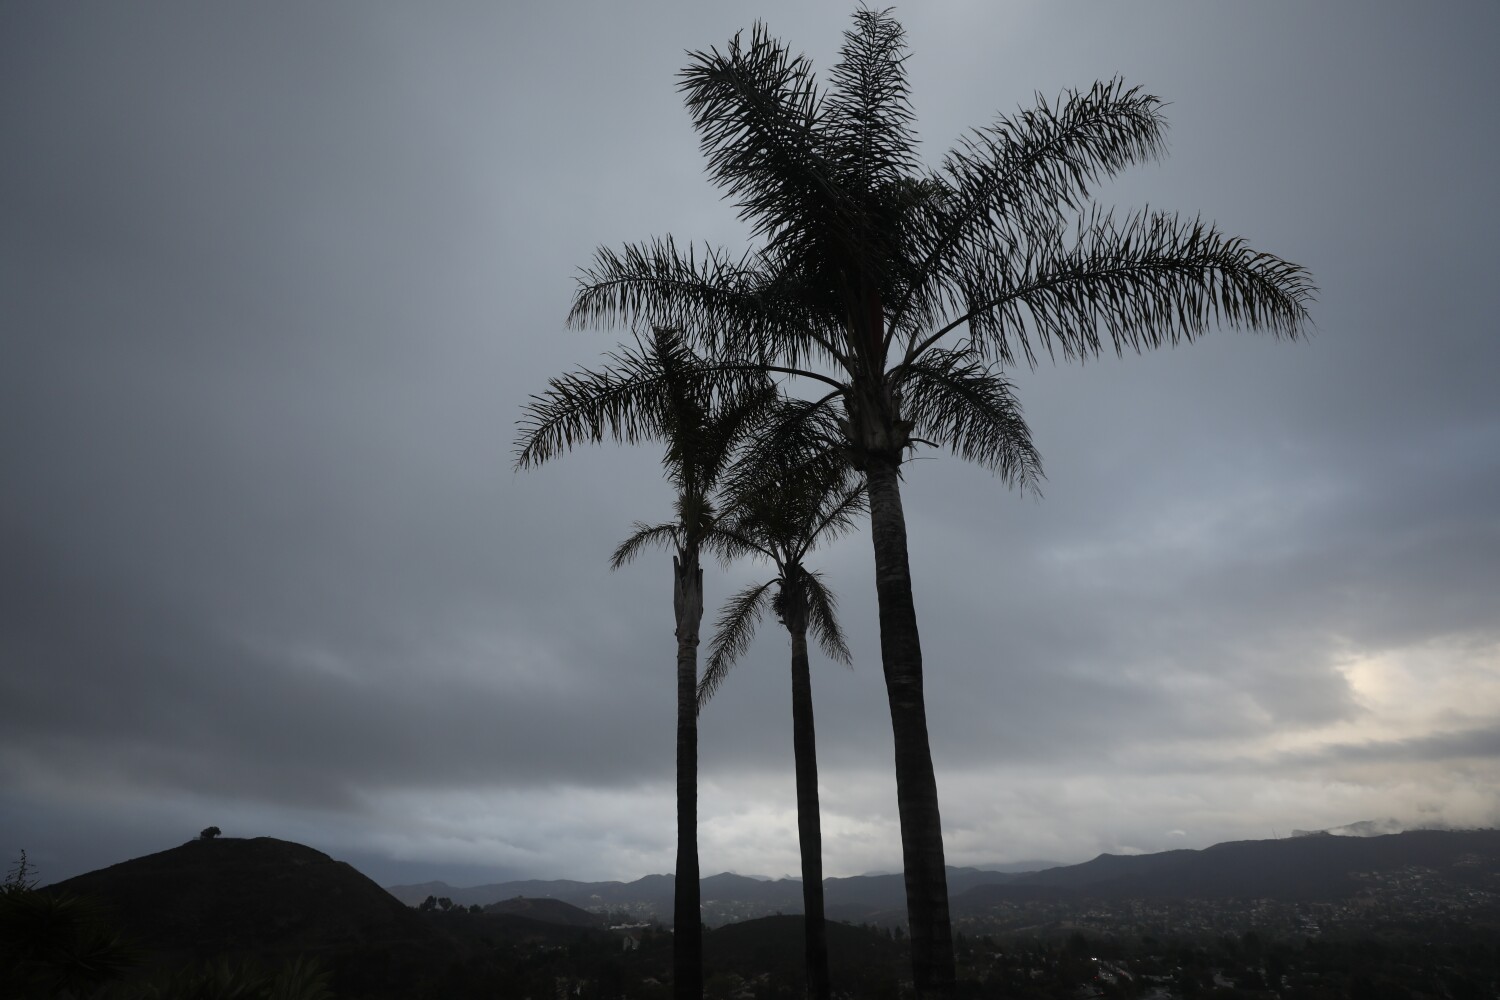 Drizzle teases L.A. after toasty weekend, and more moisture is on the way  